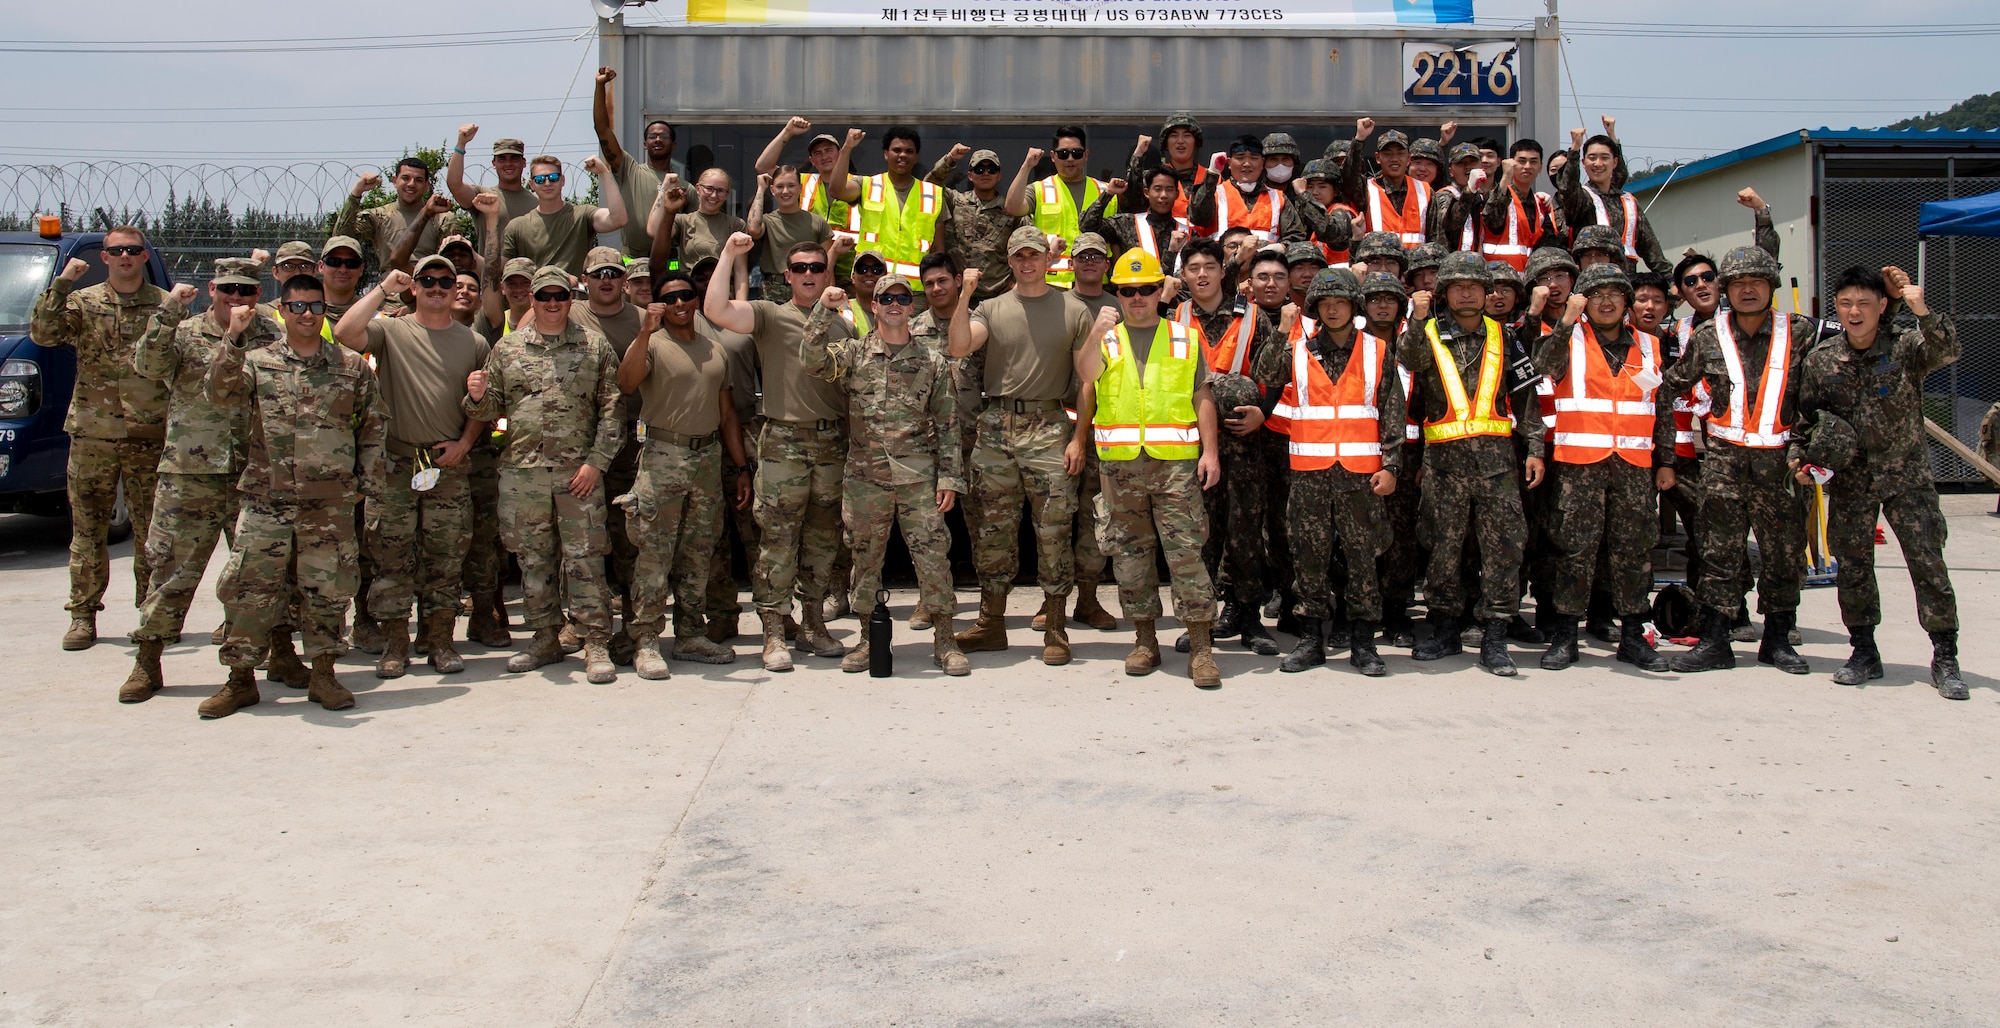 Civil Engineers from the United States Air Force (USAF) and Republic of Korea Air Force (ROKAF) stand for a group photo during a rapid airfield damage repair training, July 20, 2022 at Gwangju Air Base, Republic of Korea.